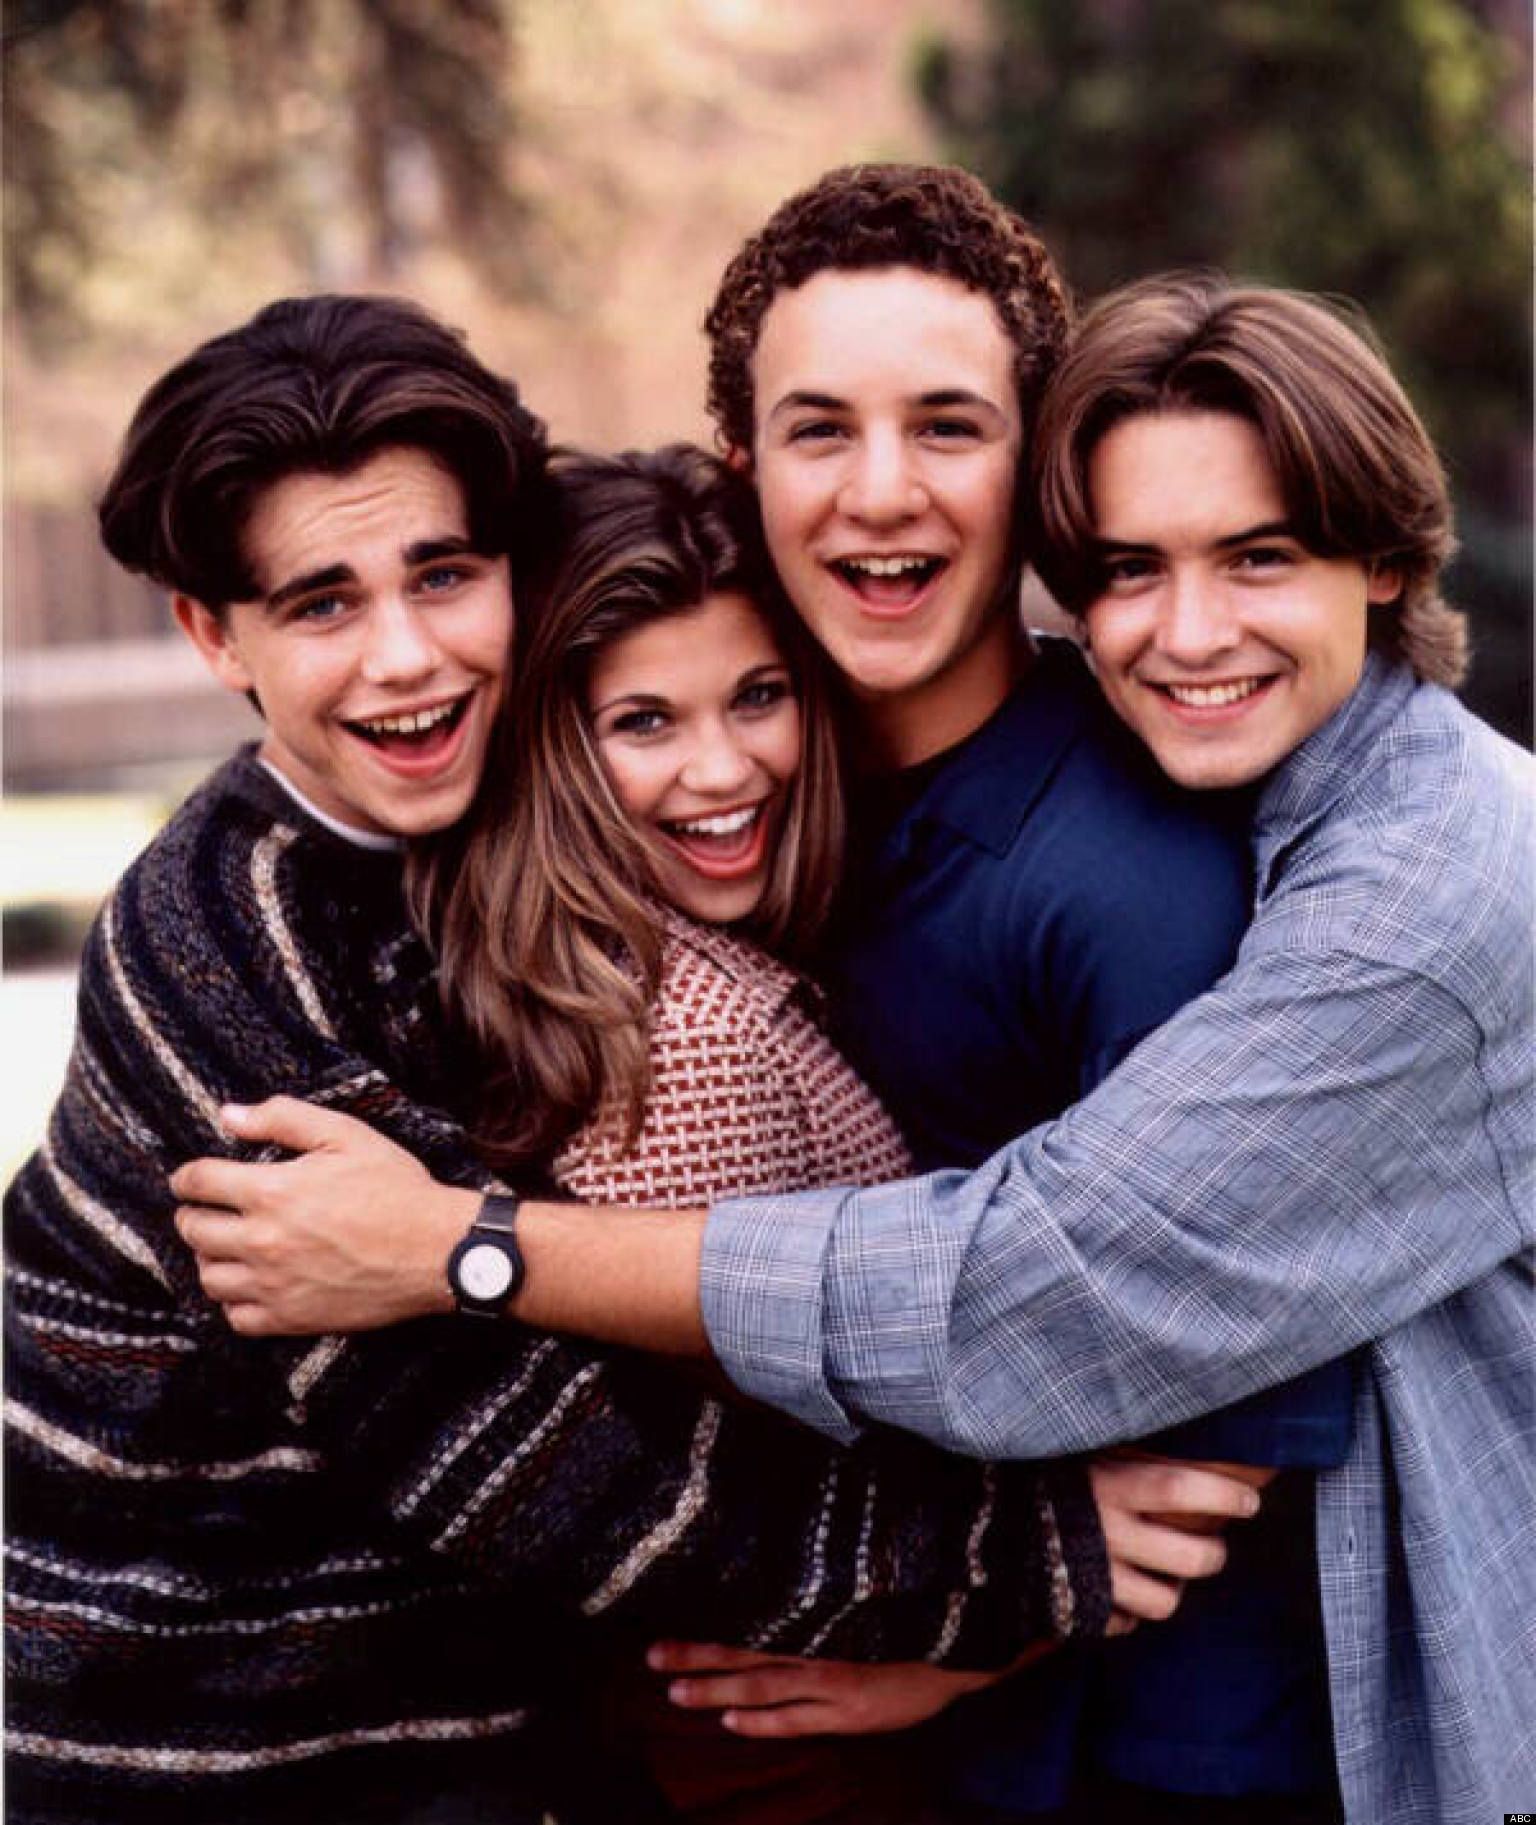 Boy Meets World Ended 16 Years Ago But Where Are The Cast Now